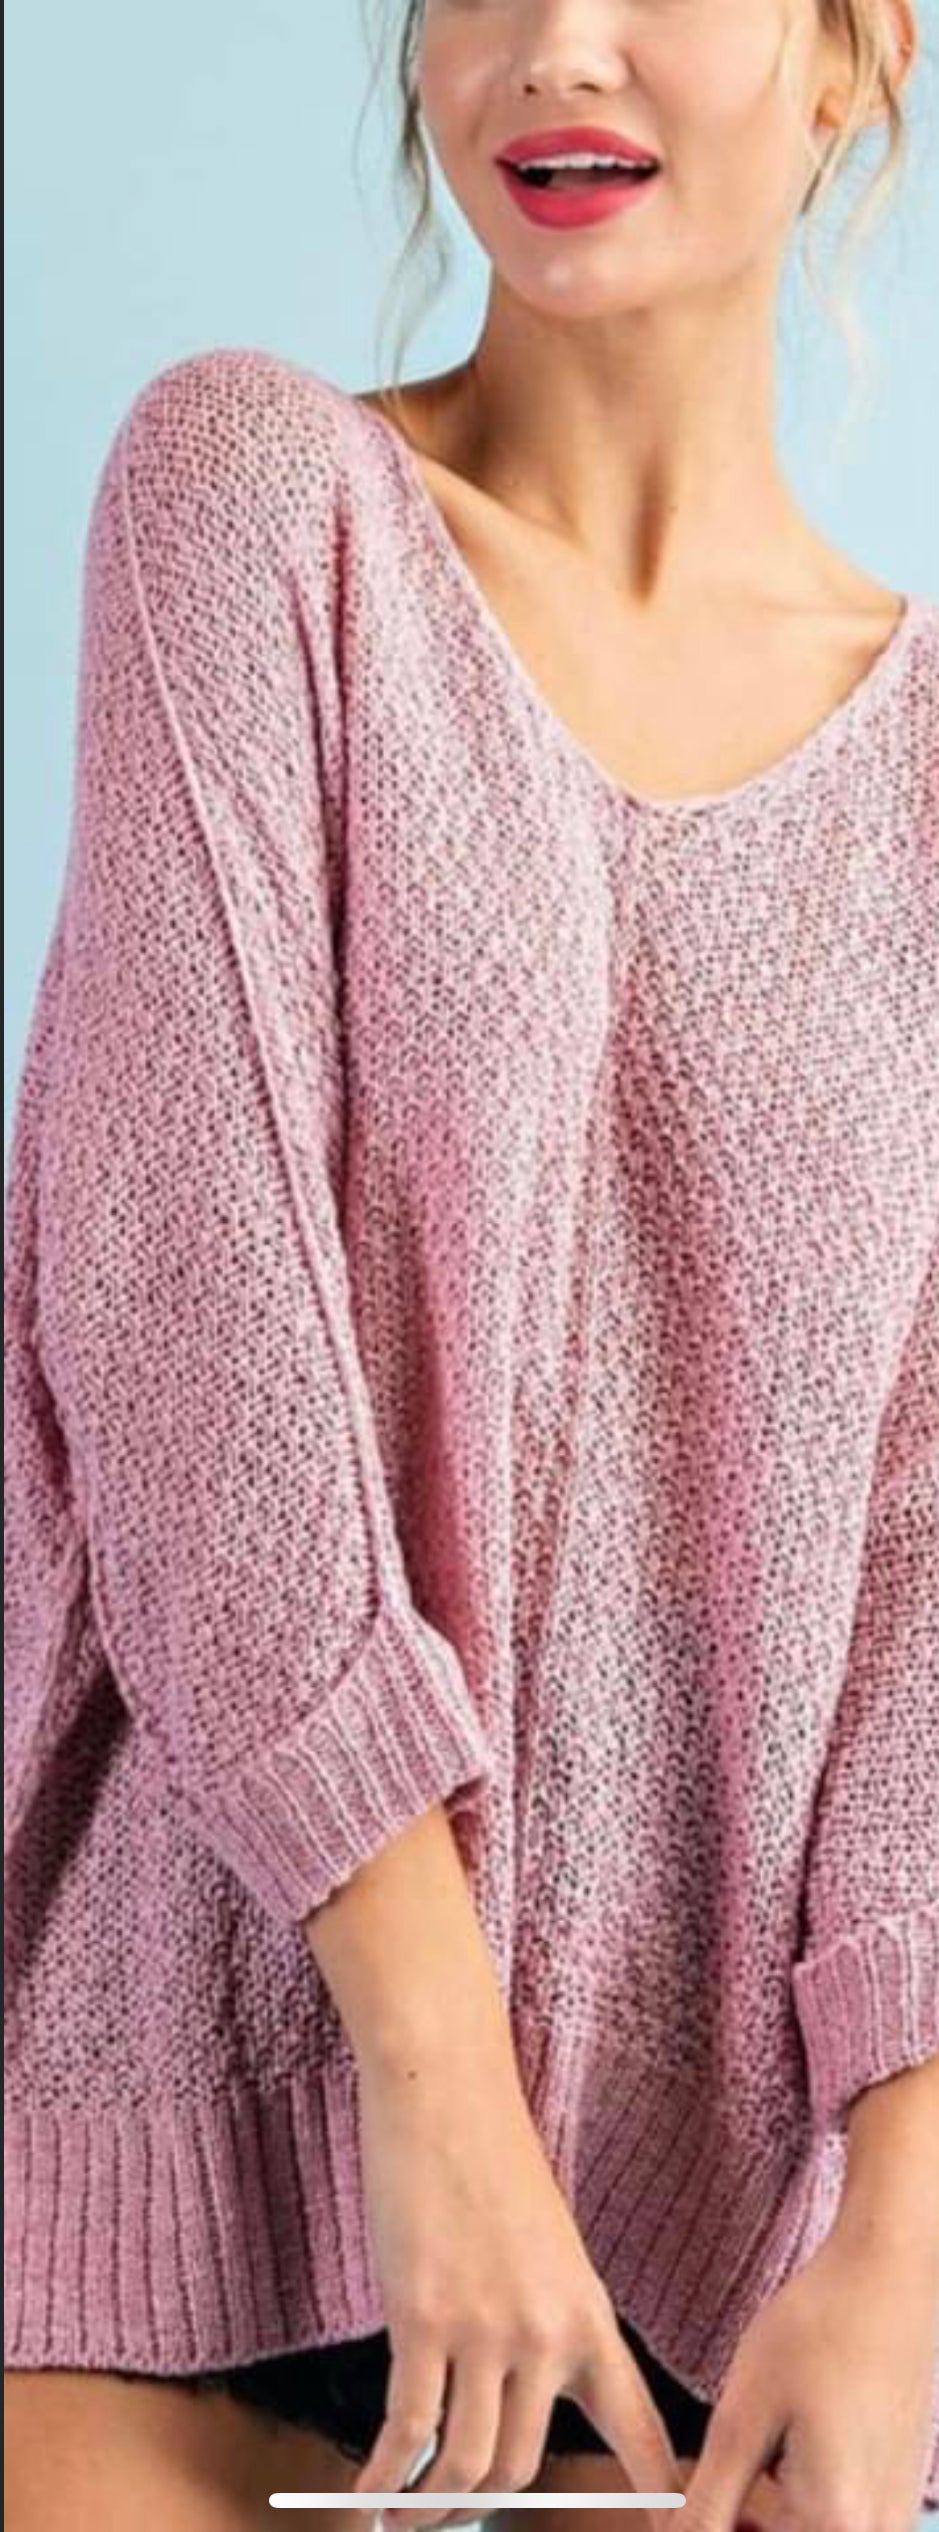 Our favorite sweater in mauve knit sweater